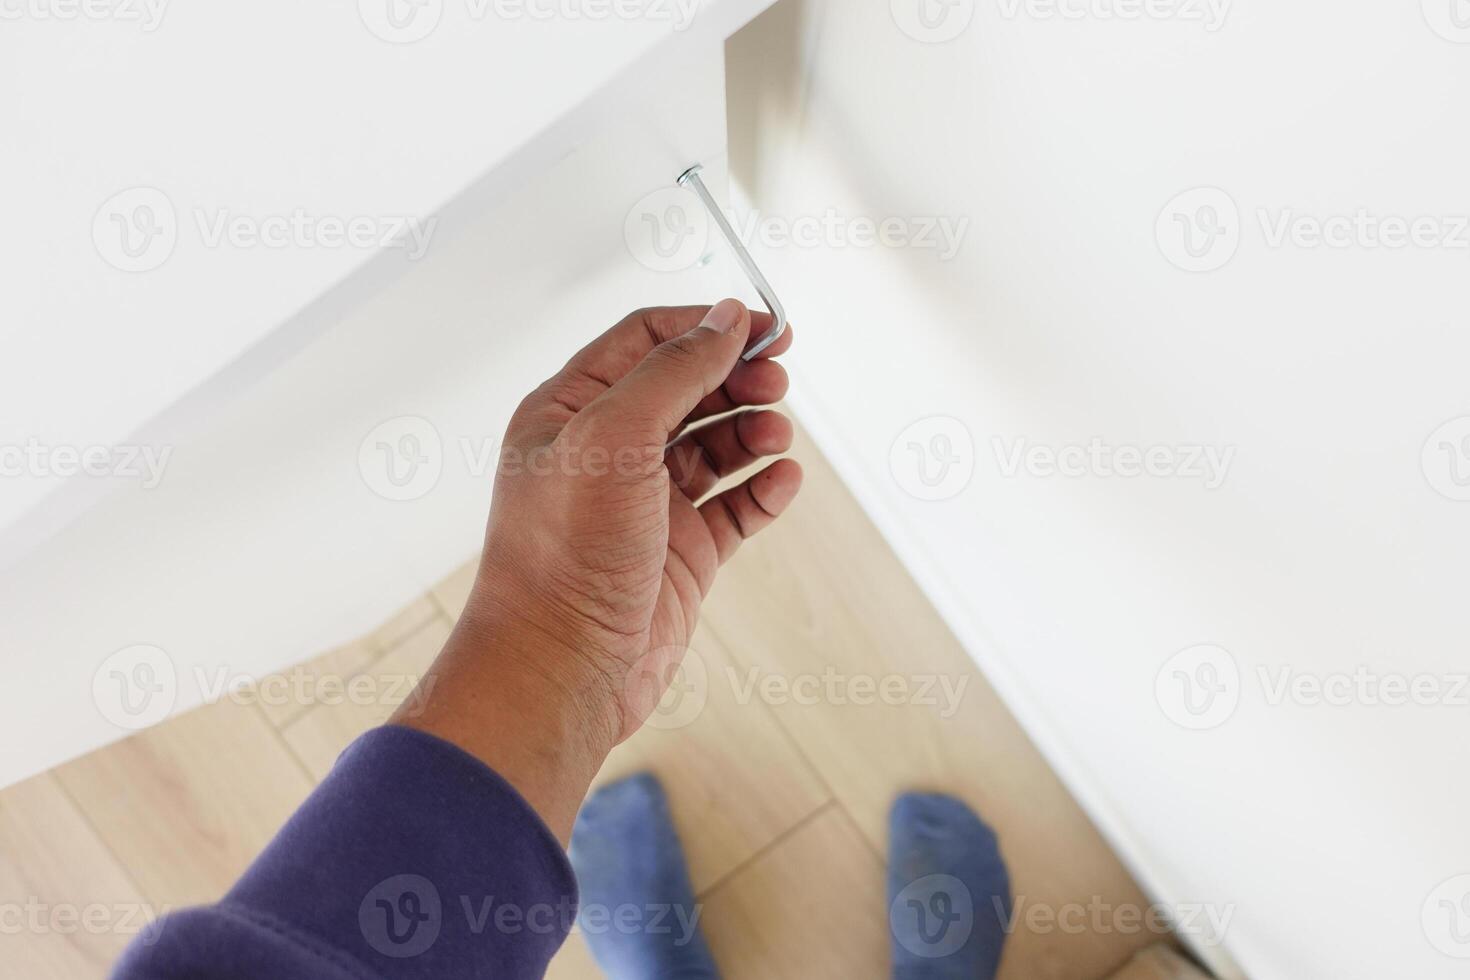 Using a wrench, theyre removing a screw from metal photo